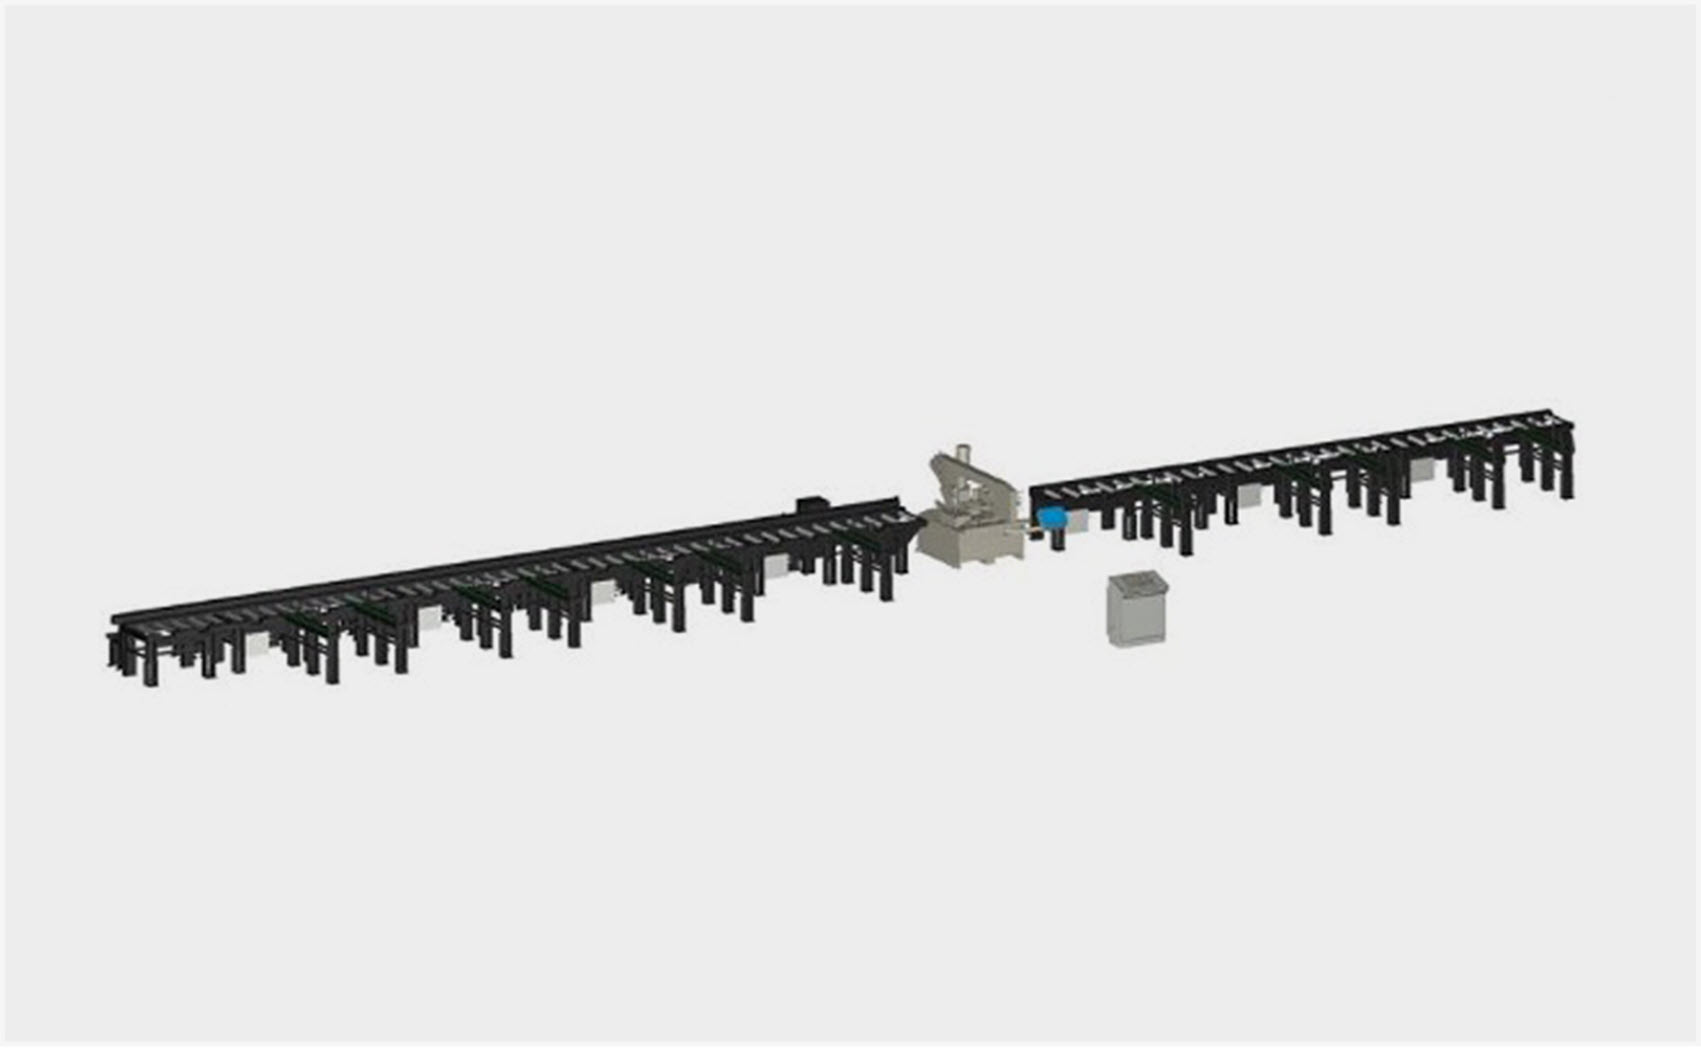 A digital 3D model of a long conveyor system with multiple components, designed for industrial use.